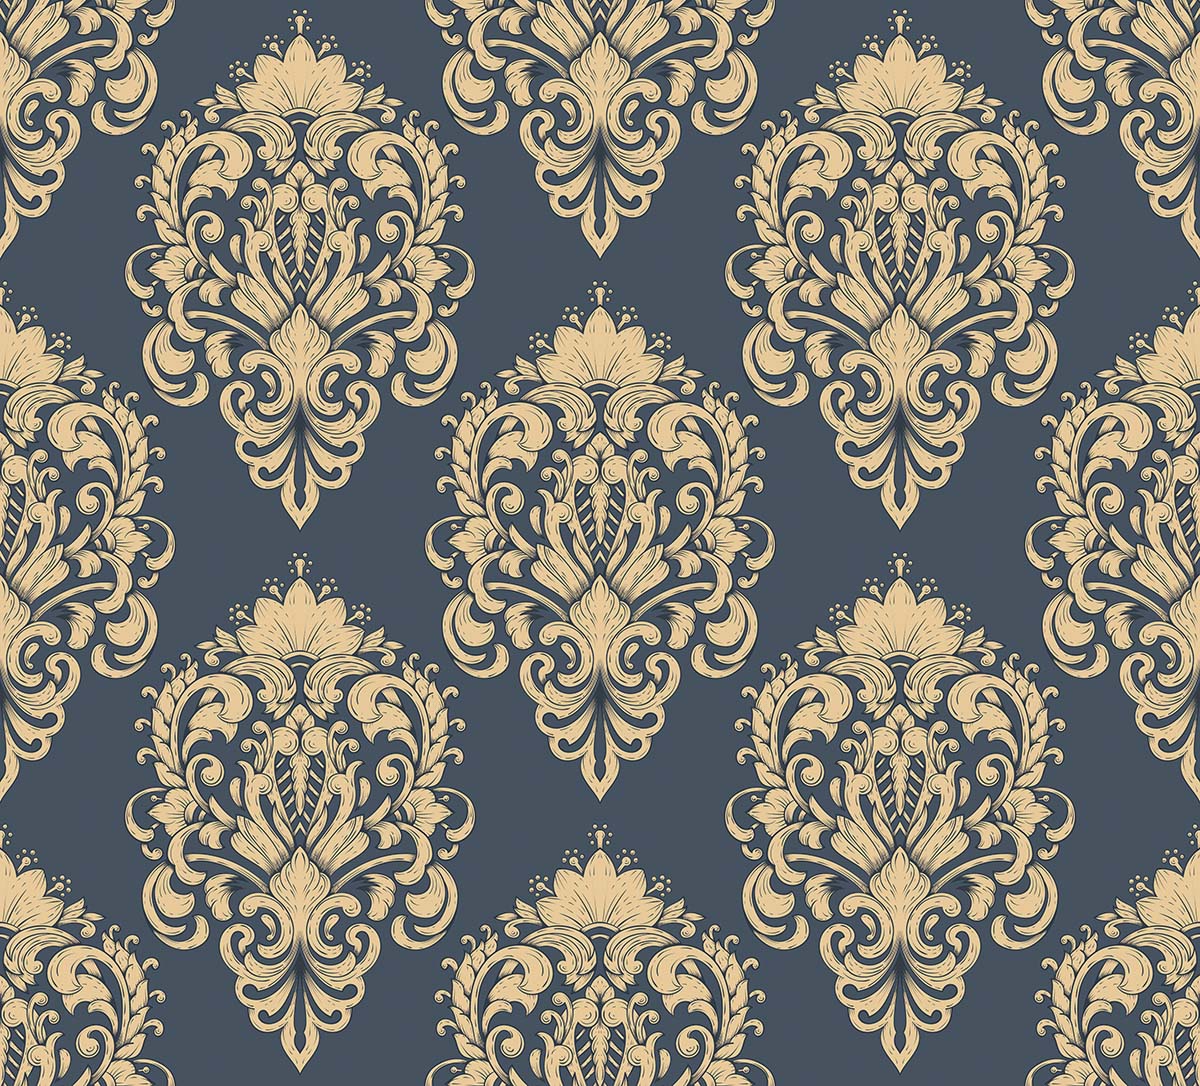 A wallpaper with a pattern